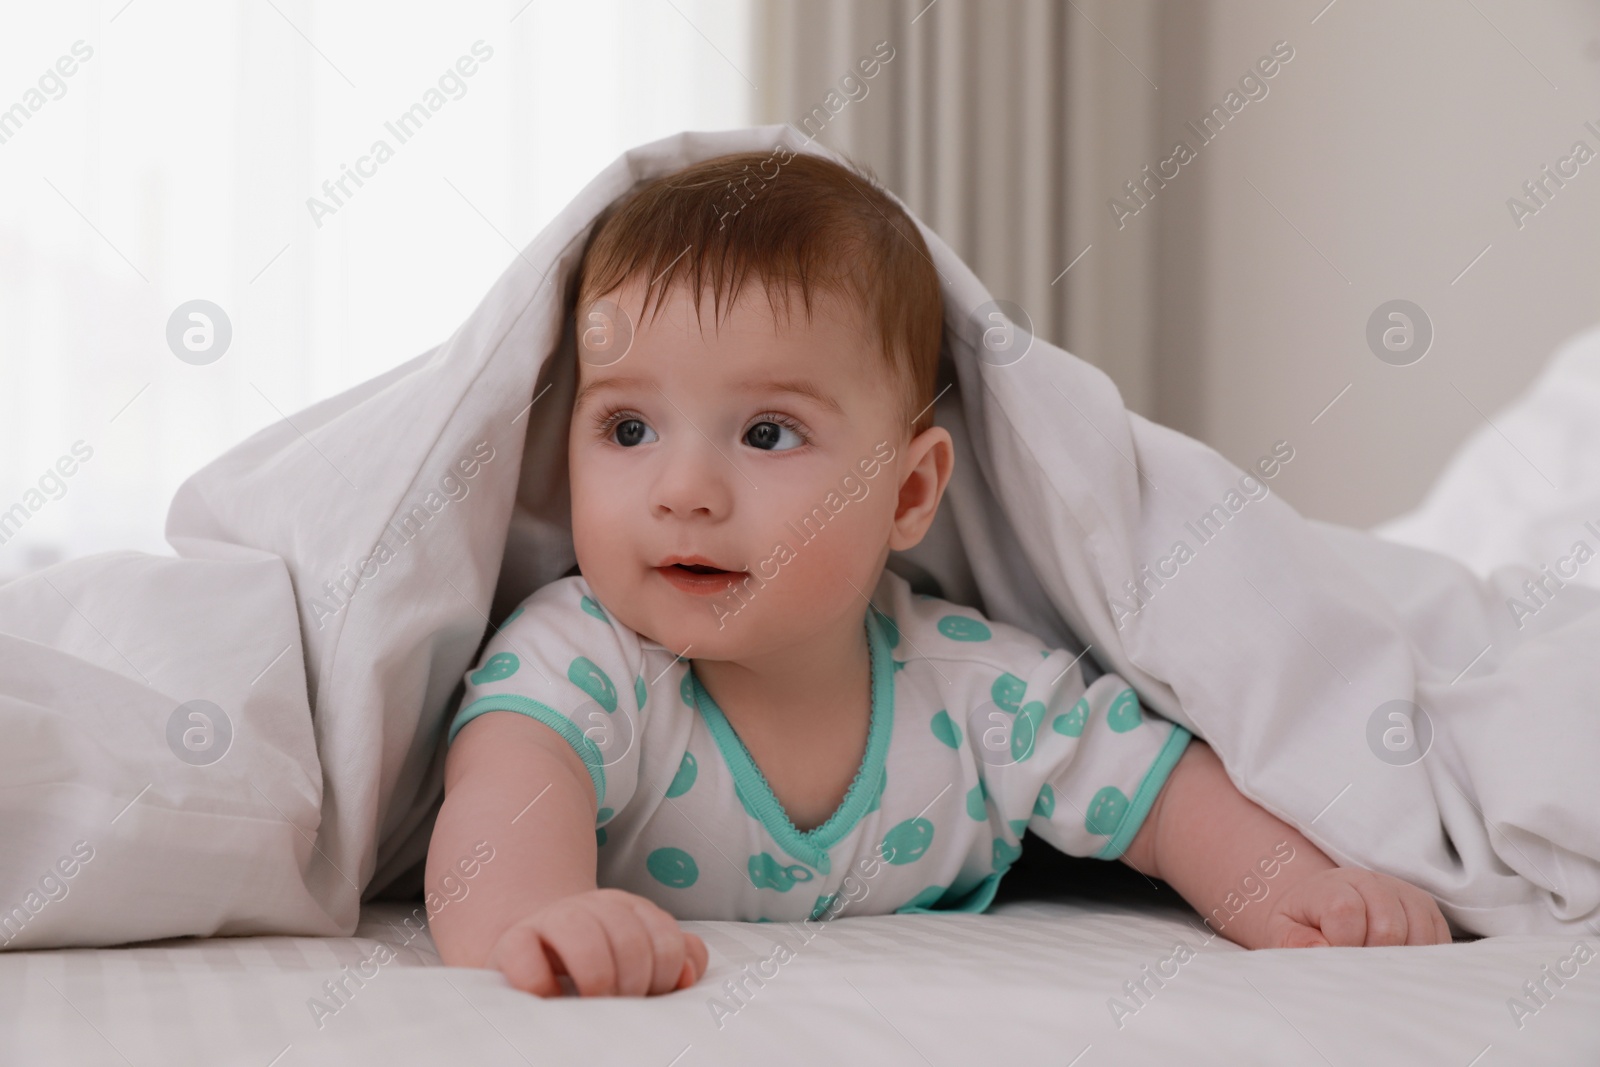 Photo of Cute little baby in bed under soft blanket indoors